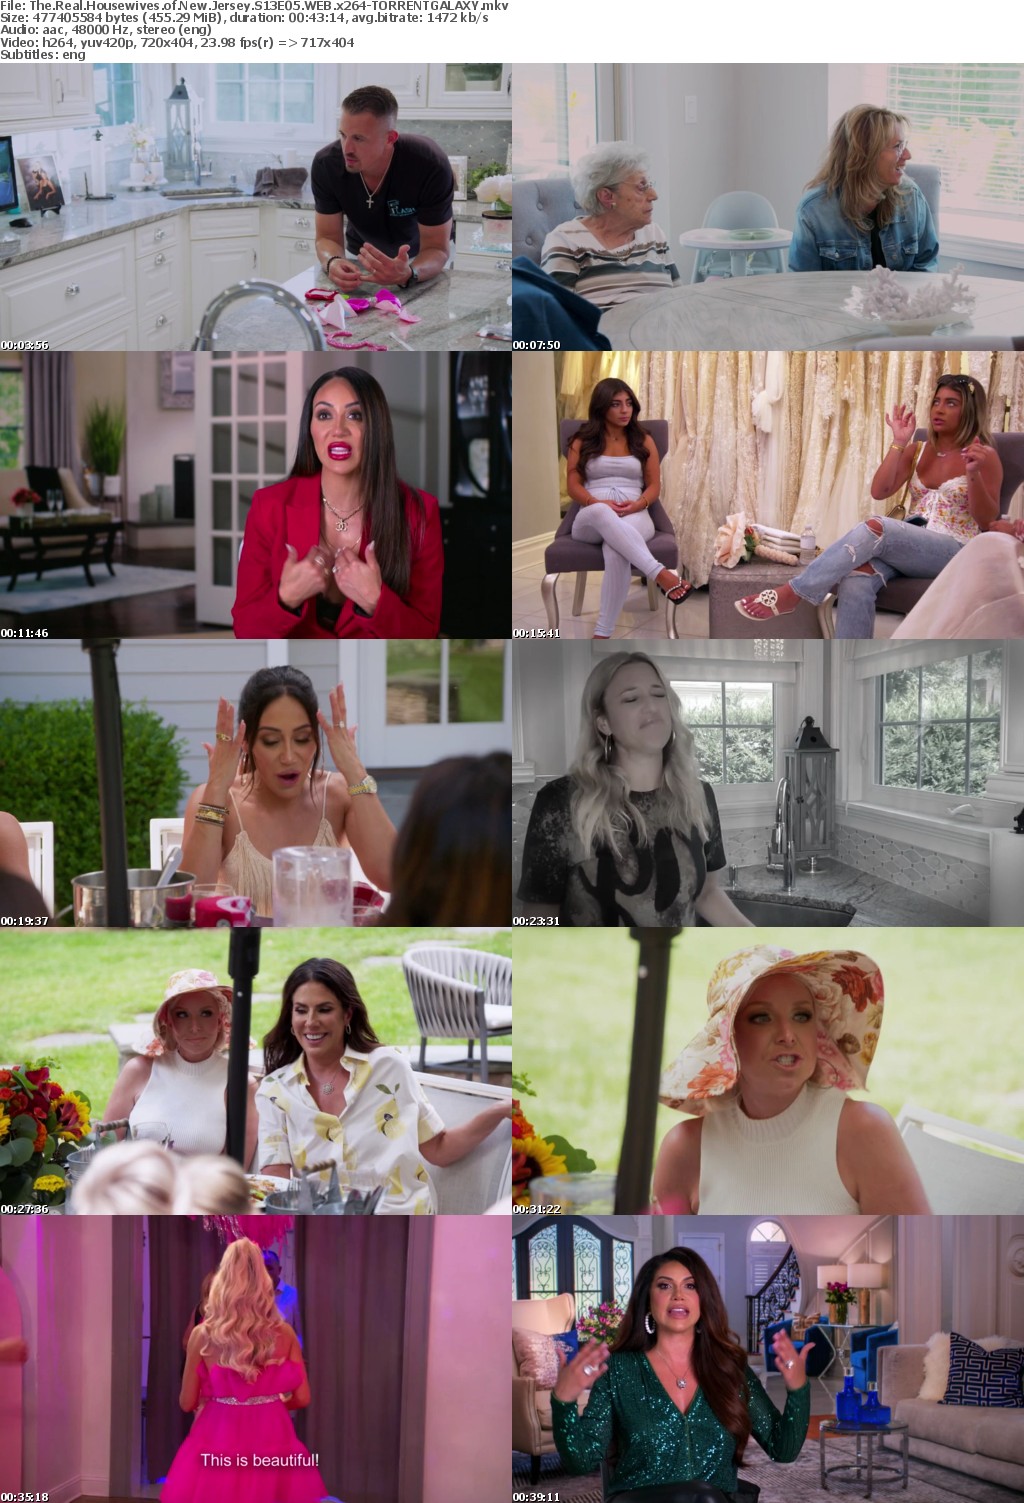 The Real Housewives of New Jersey S13E05 WEB x264-GALAXY